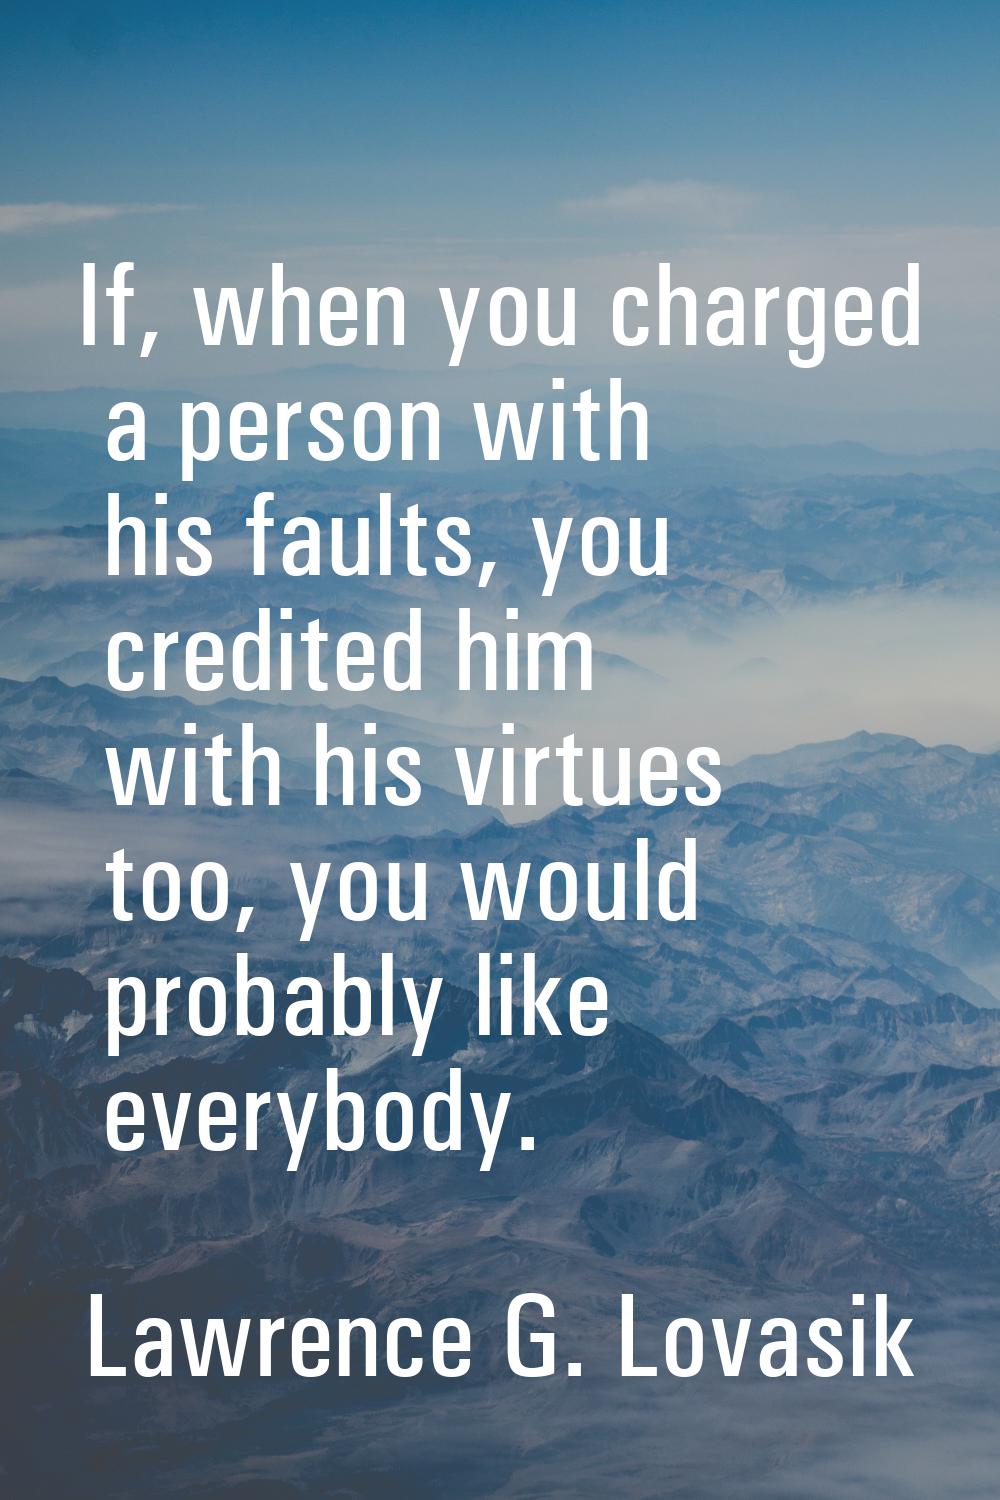 If, when you charged a person with his faults, you credited him with his virtues too, you would pro